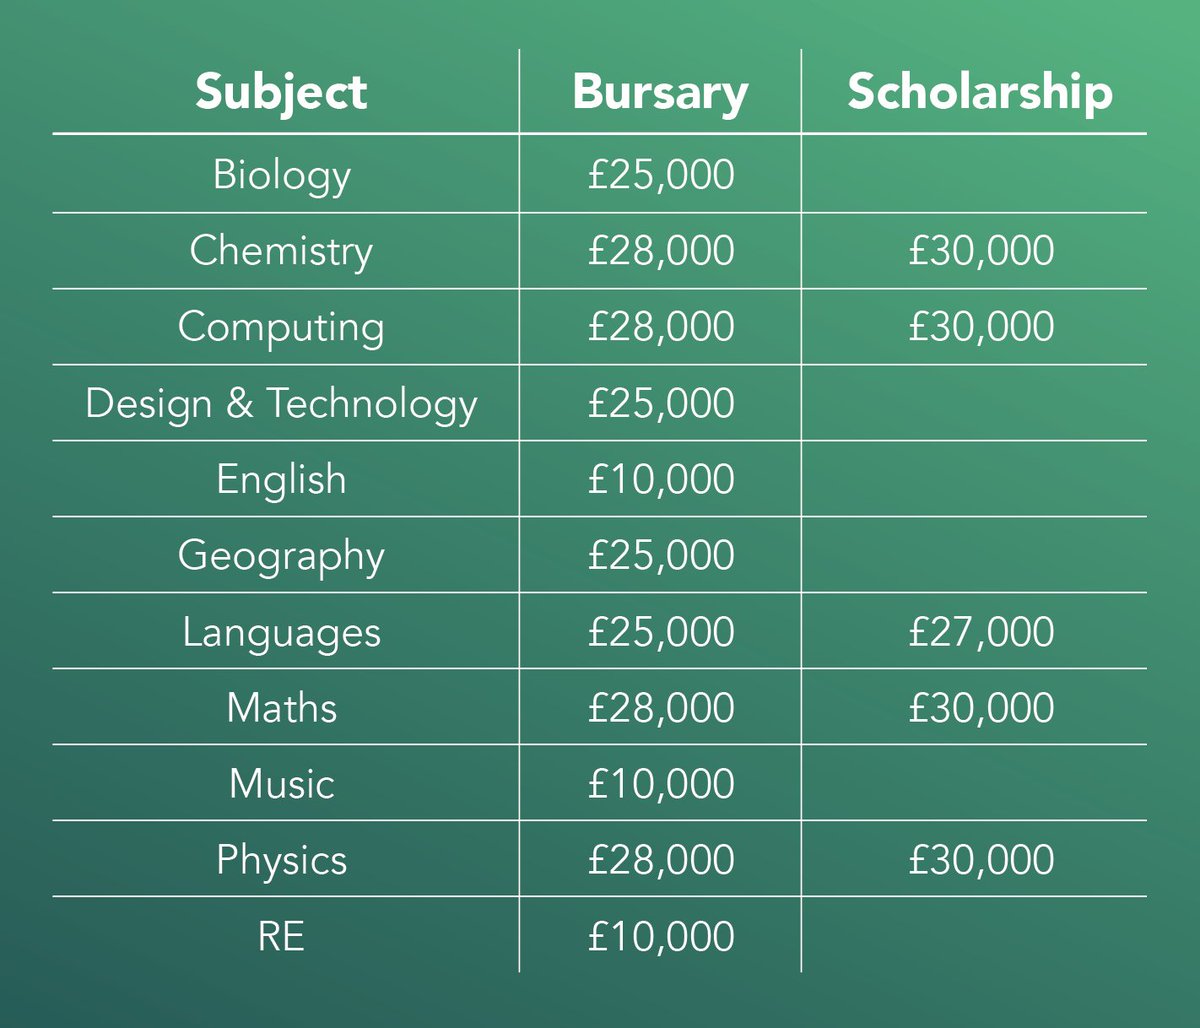 Did you know trainee teachers can have their tuition fees covered by Student Finance, receive maintenance loans, and even qualify for tax-free bursaries and scholarships of up to £30,000? 💰✨ Learn more about funding and eligibility here: loom.ly/Wz9Huzg #ITT